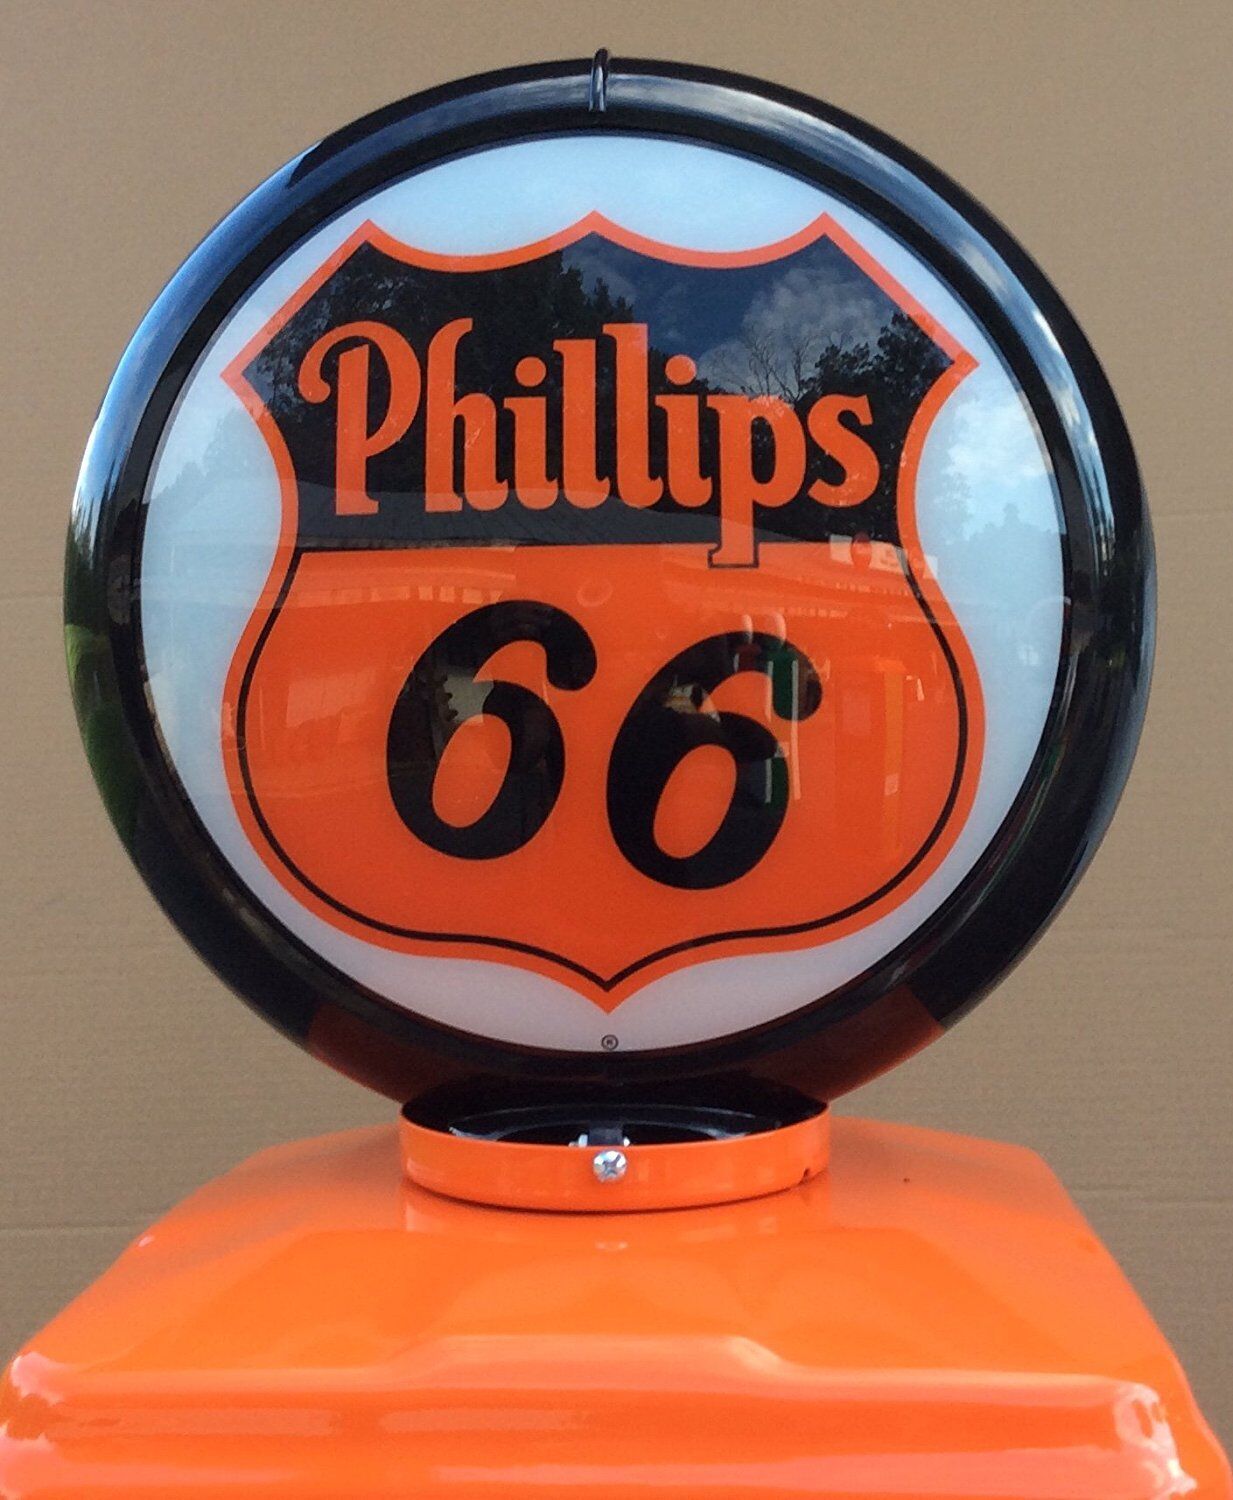 NEW PHILLIPS 66  REPRODUCTION GAS PUMP - ANTIQUE OIL  REPLICA - FREE SHIPPING* Phillips 66 - фотография #2